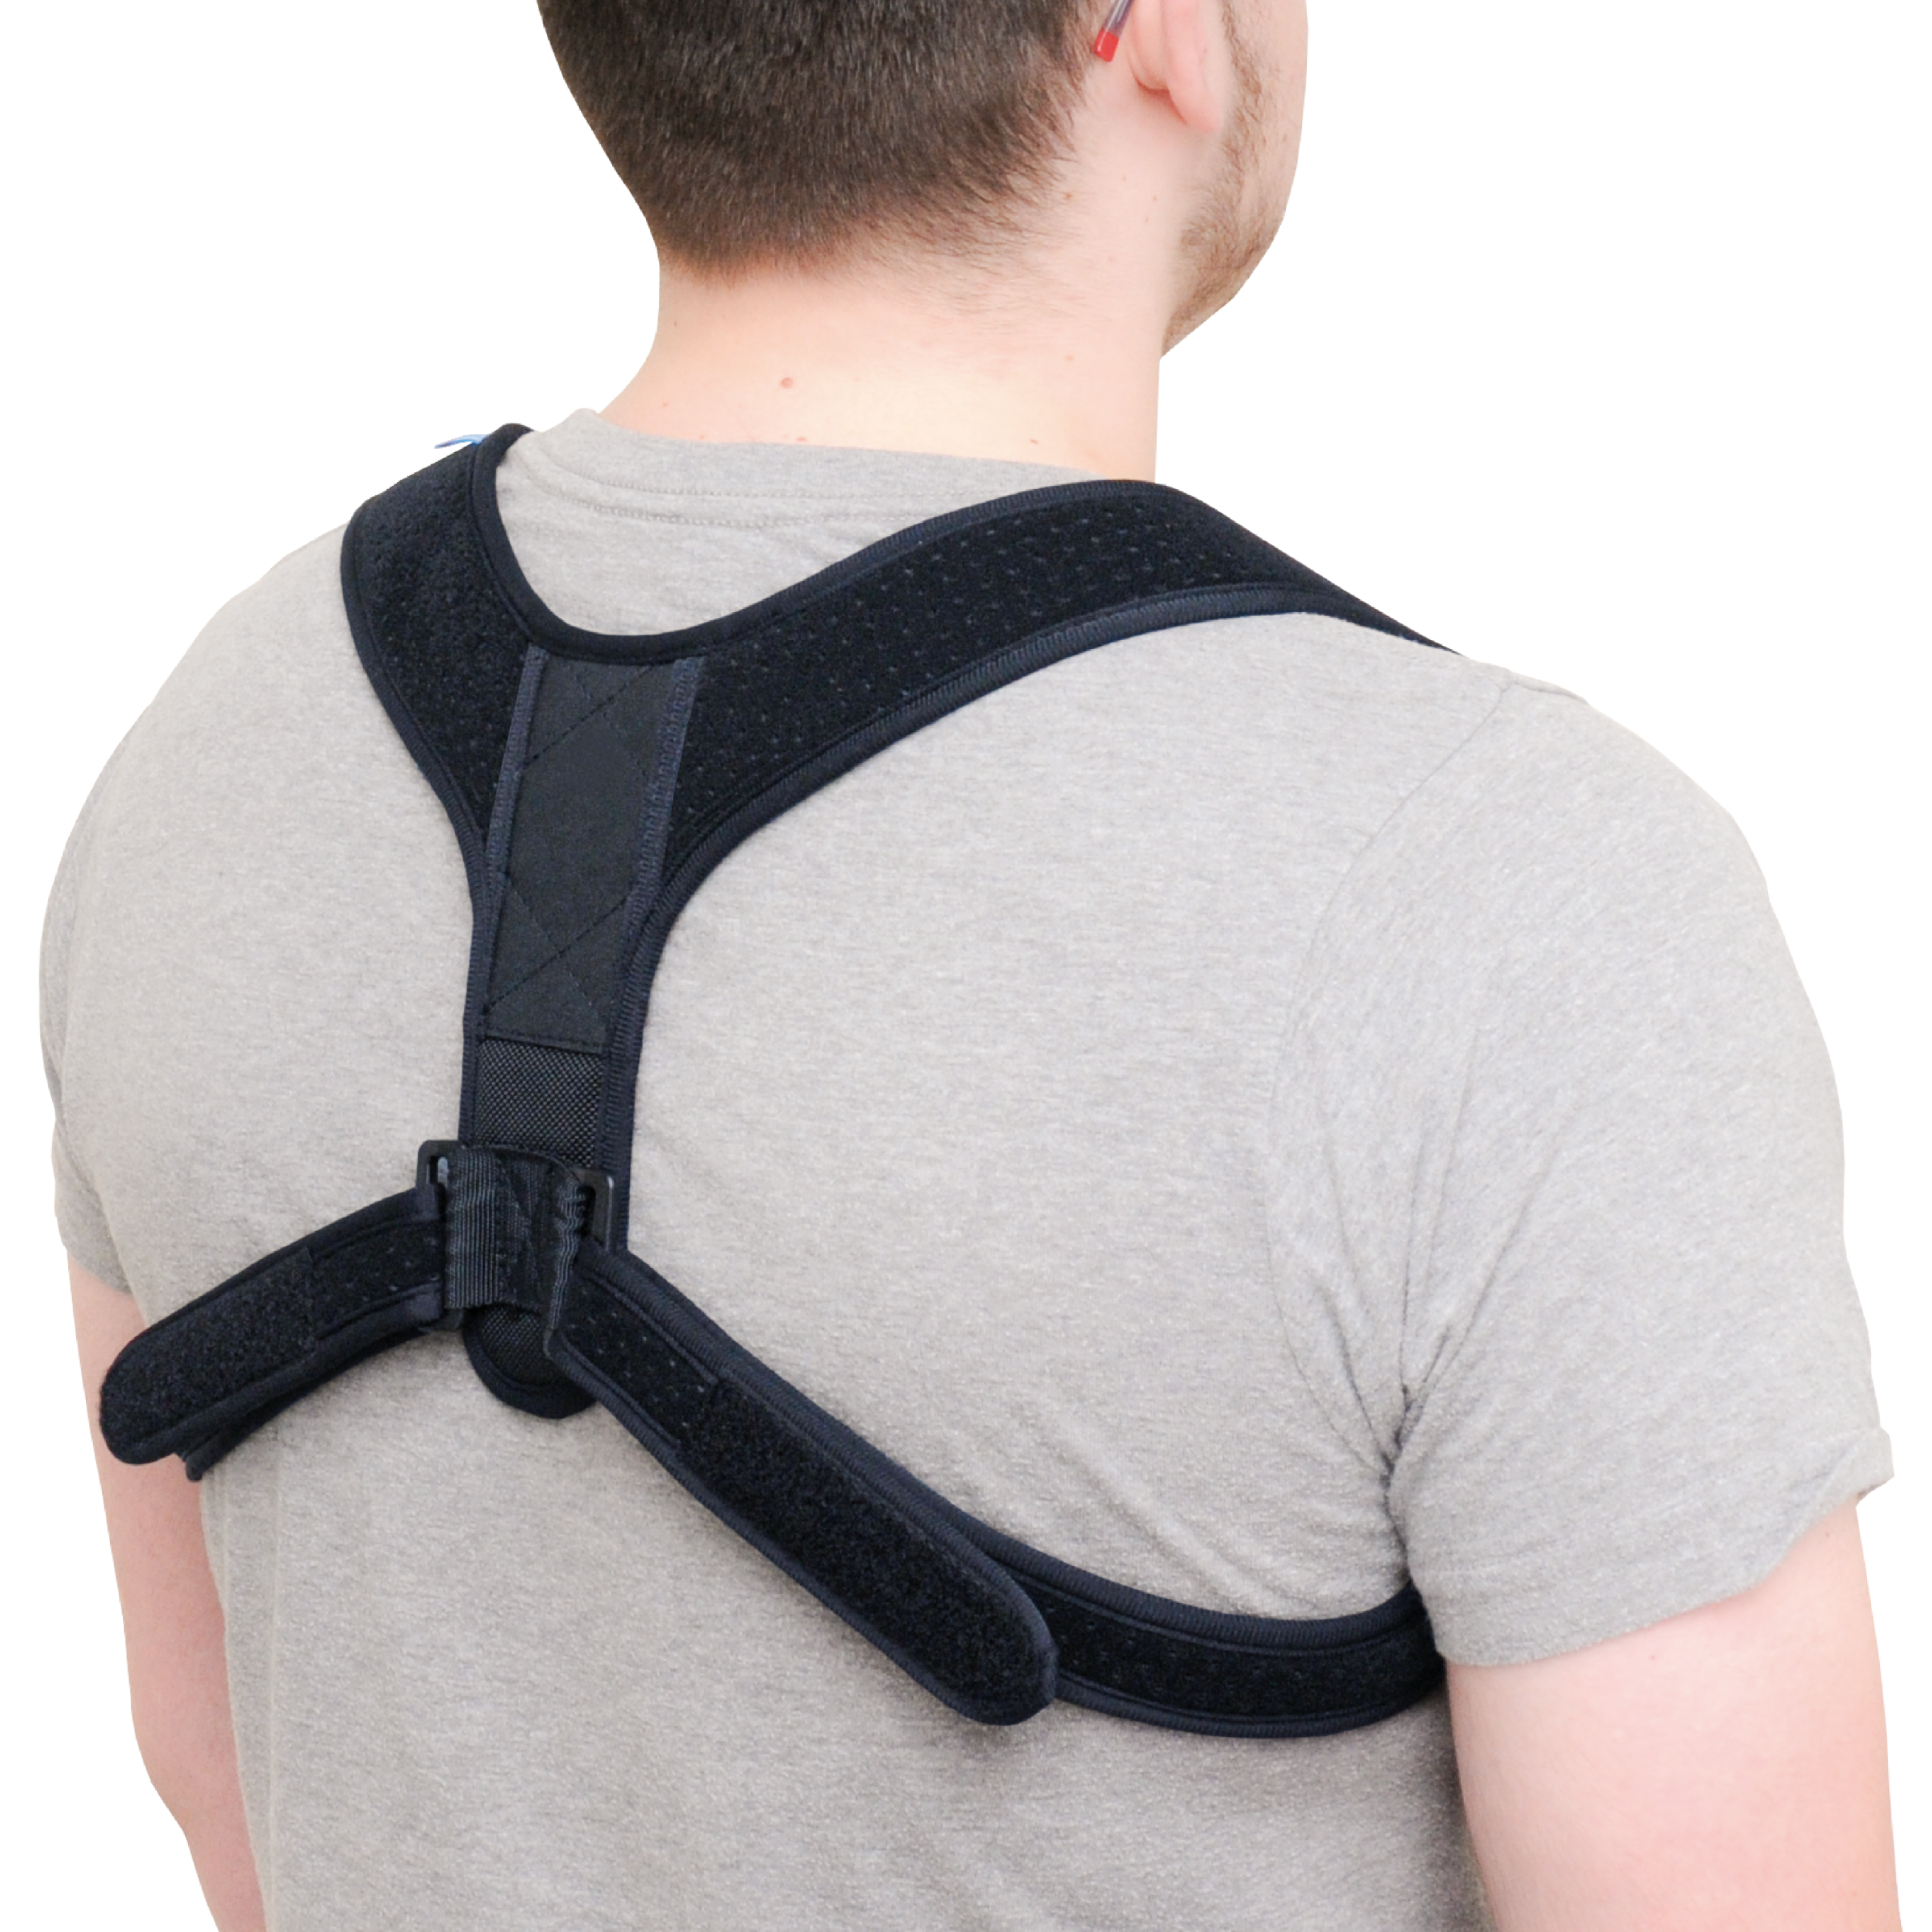 Express Orthopaedic® Posture Support